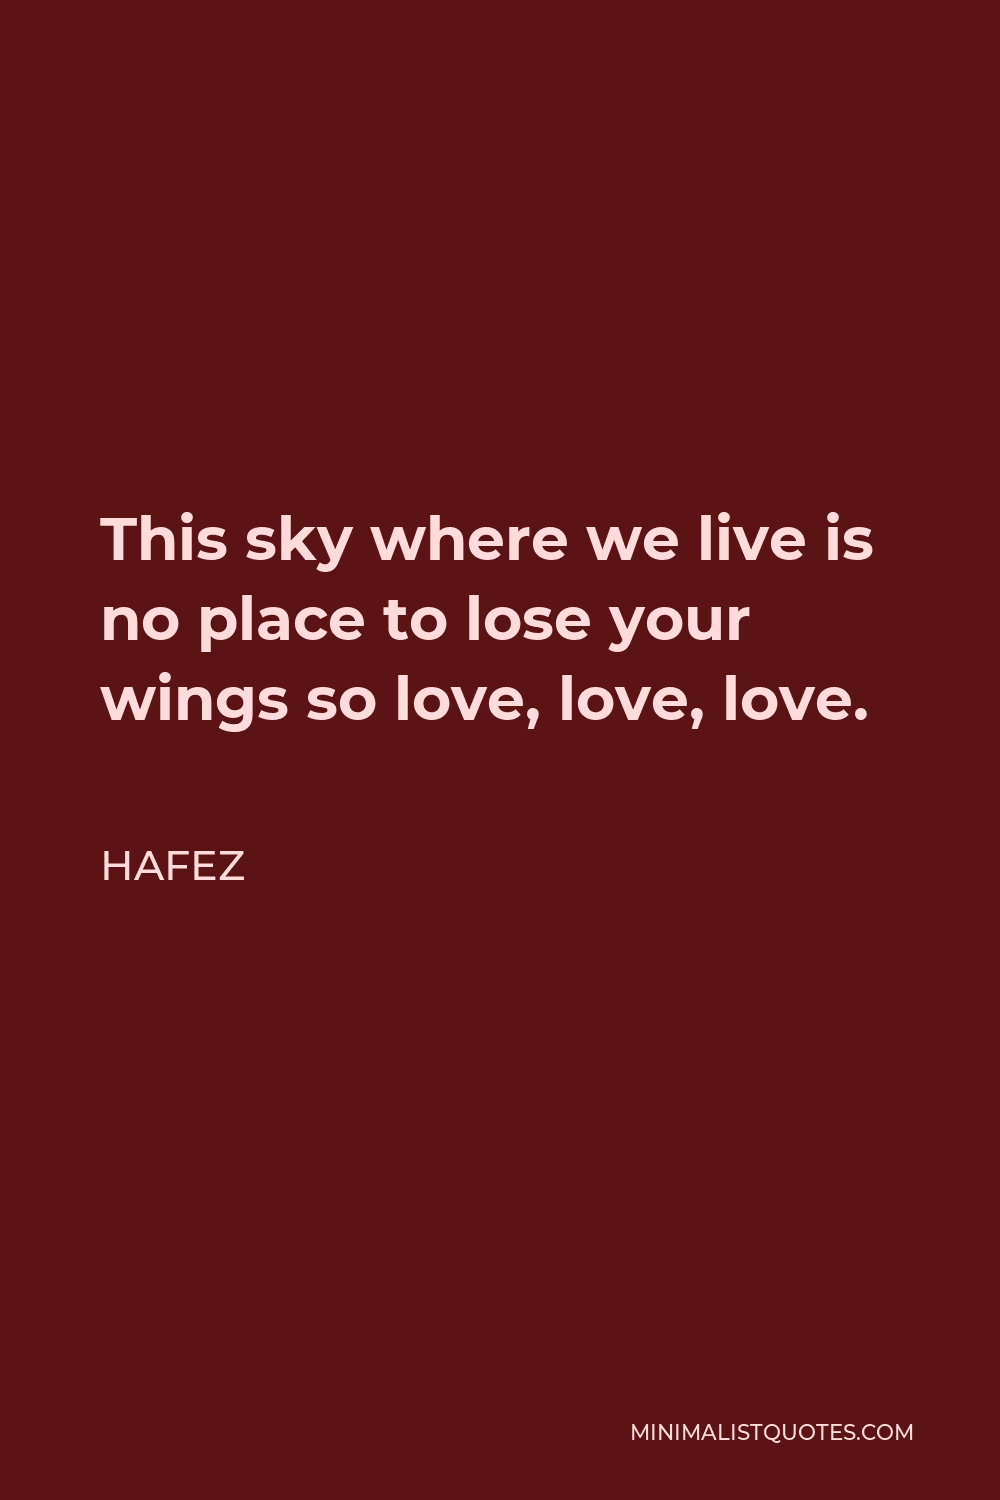 Hafez Quote - This sky where we live is no place to lose your wings so love, love, love.